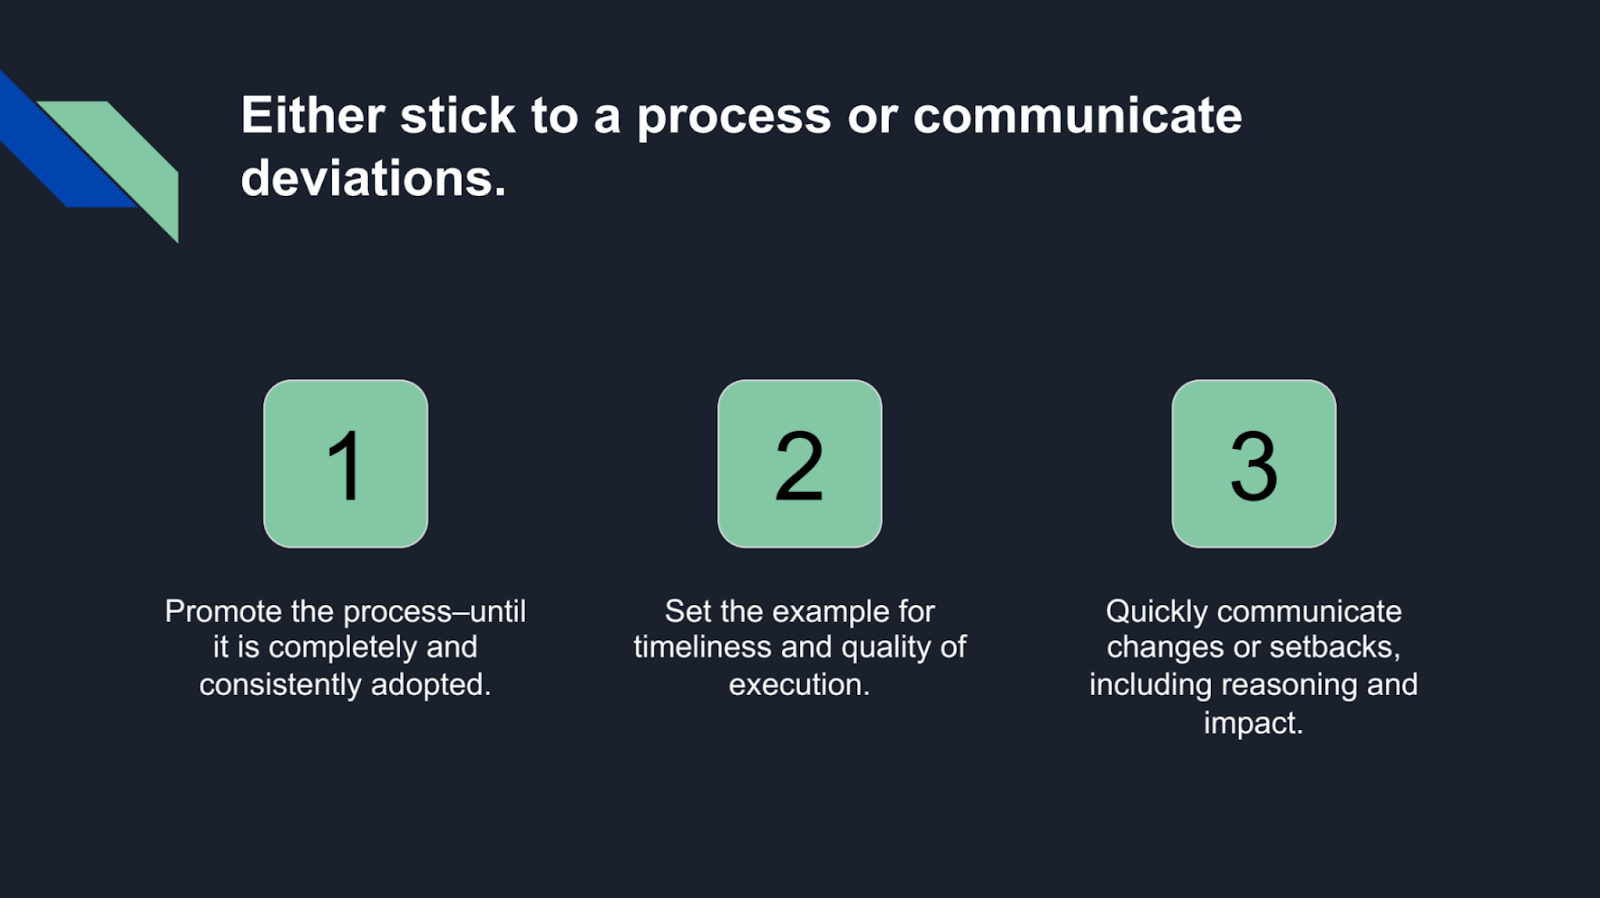 Either stick to a process or communicate deviations.